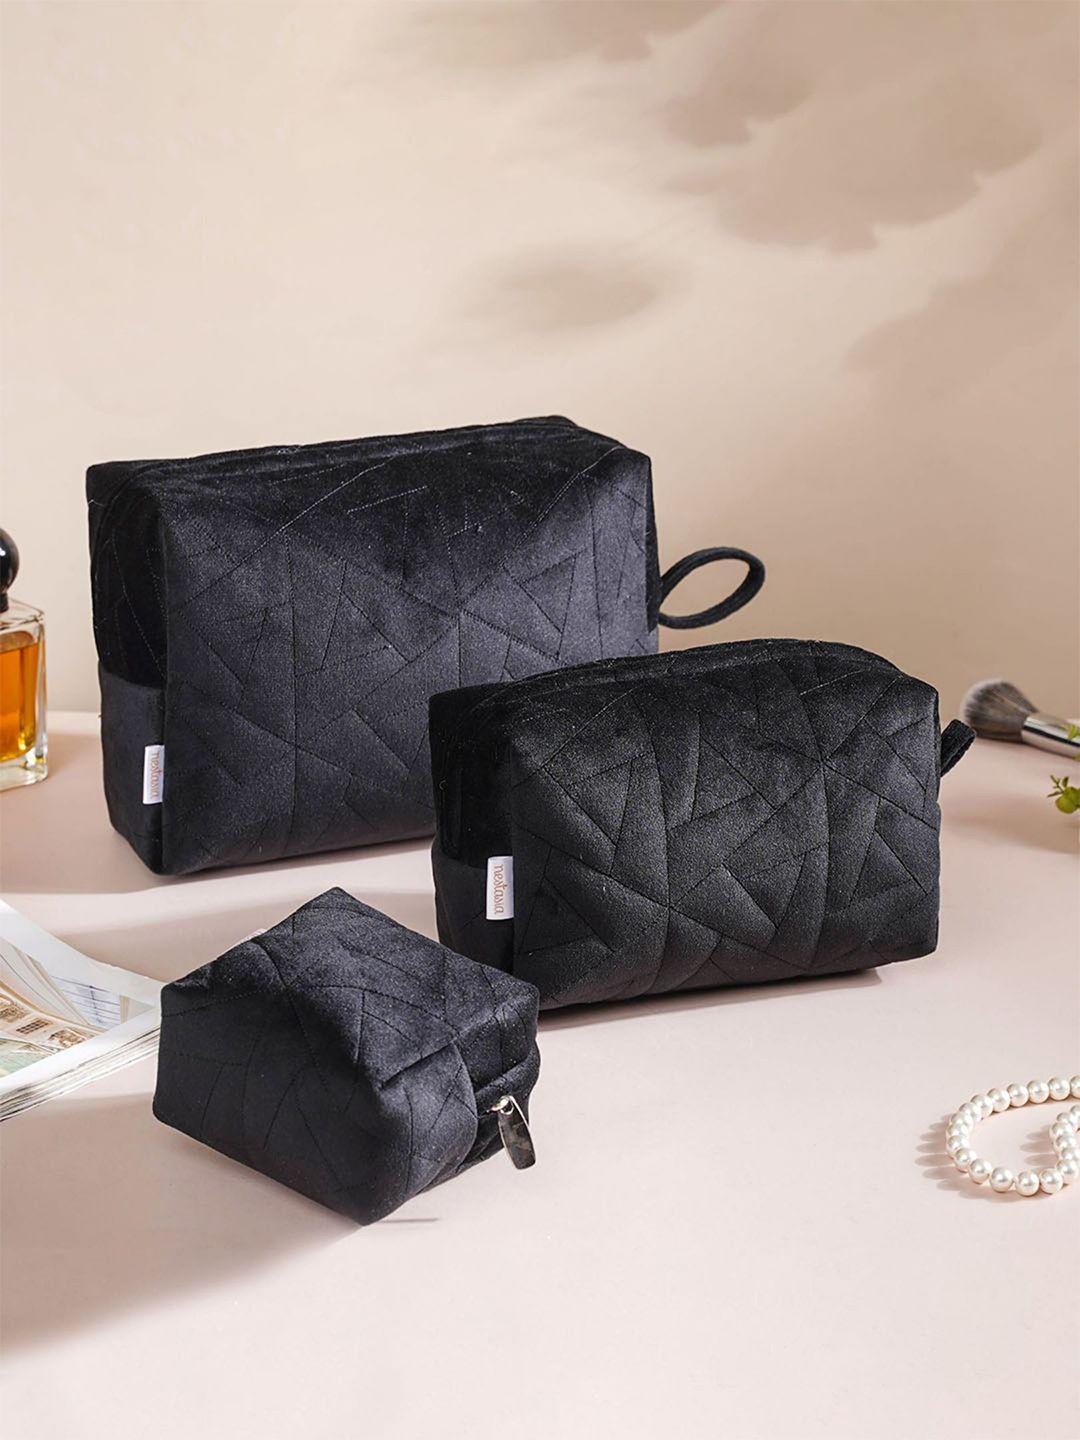 nestasia set of 3 black quilted cosmetic bags